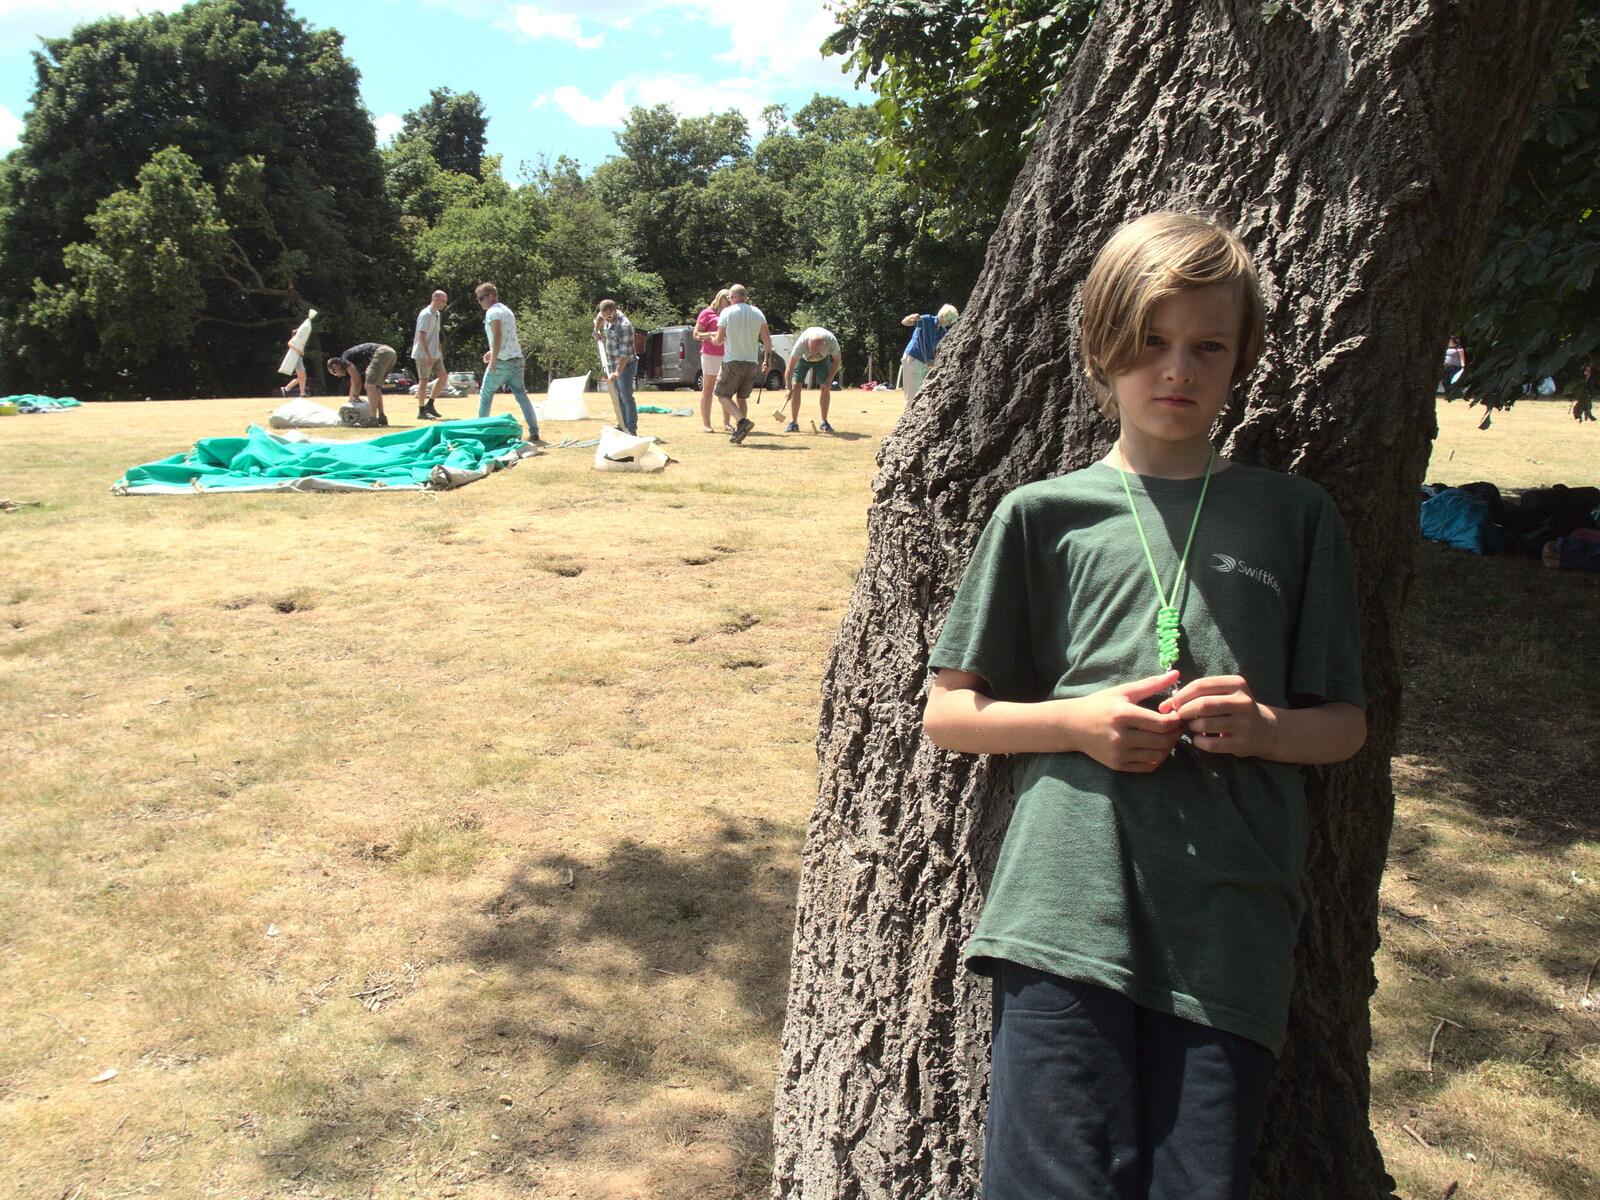 Harry hangs around from A Fire, a Fête, and a Scout Camp, Hallowtree, Suffolk - 30th June 2022